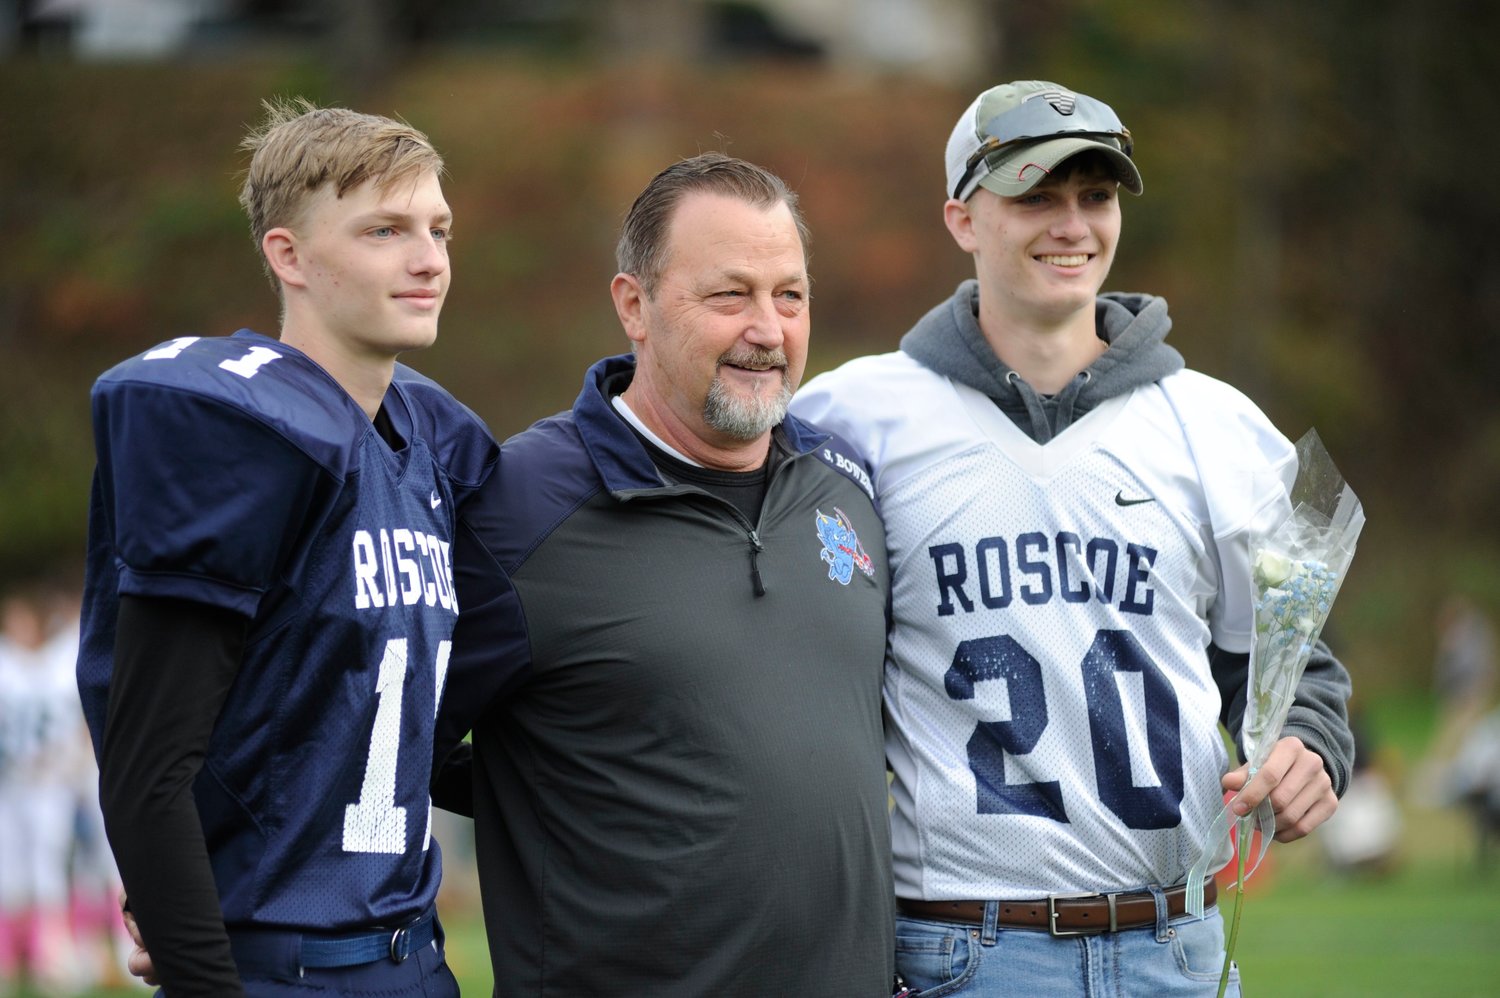 Blue Devils honor senior football players. Pictured are seniors Matthew Bowers and Nathan Bowers with their proud father.